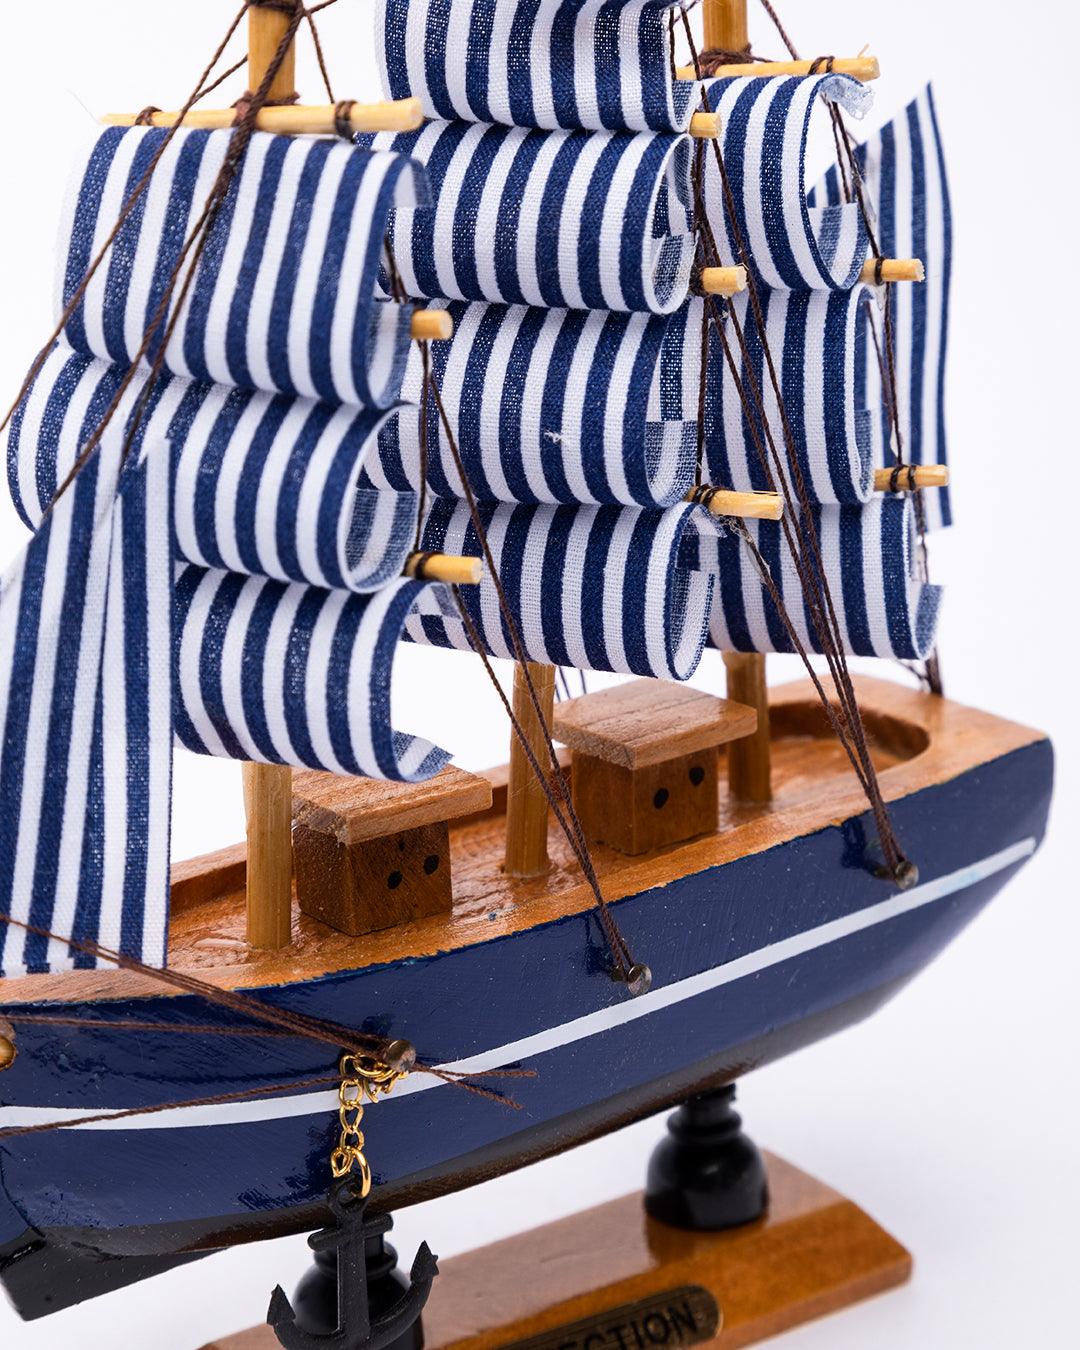 Decorative Boat, Handcrafted Wood, For Home & Office Décor, Antique Finish, Blue, Wood - MARKET 99